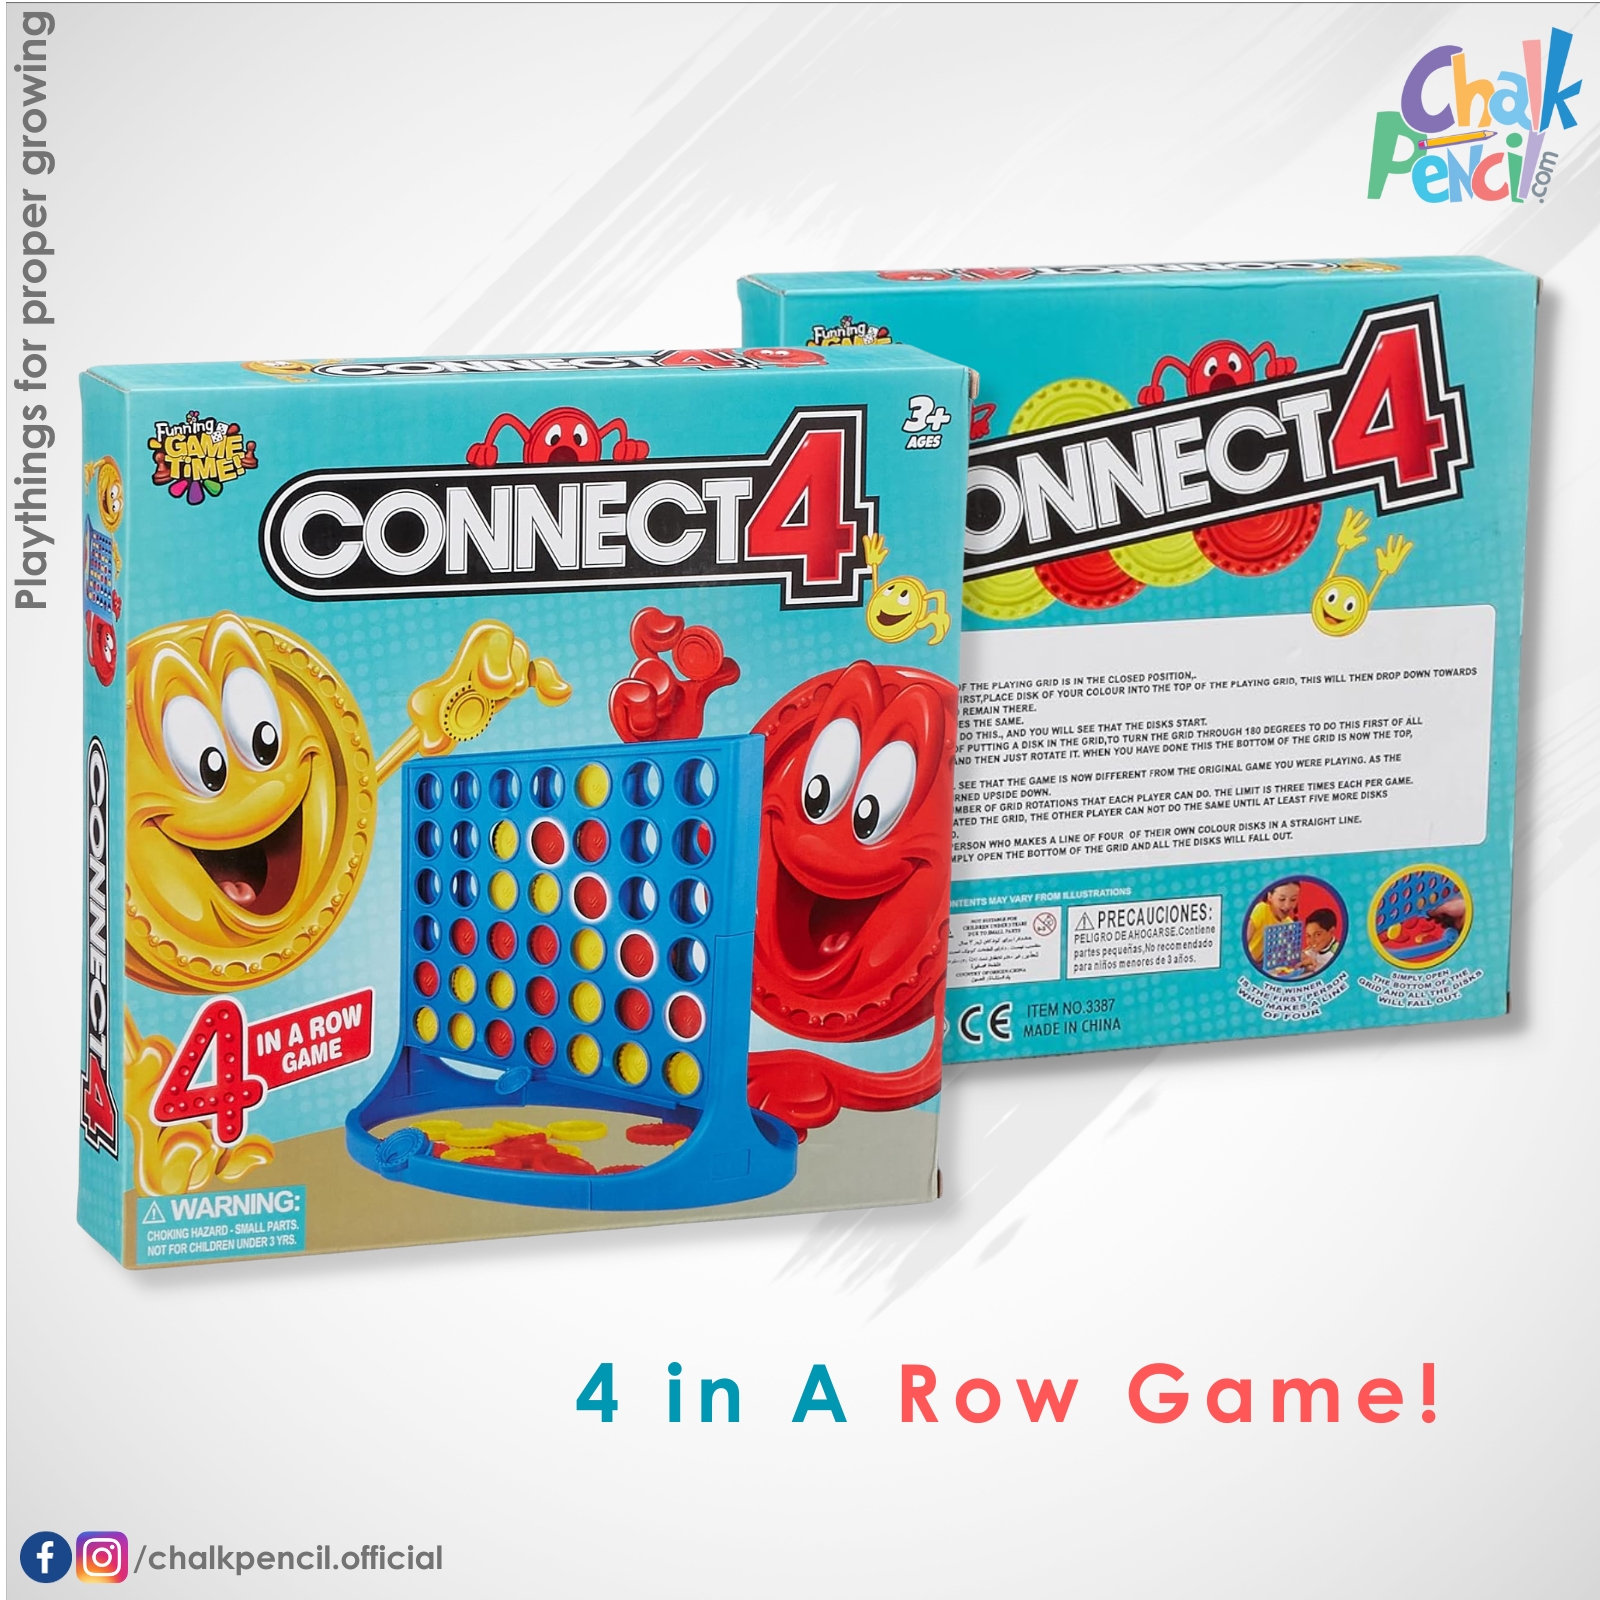 Web Connect 4 Strategic Game (1)